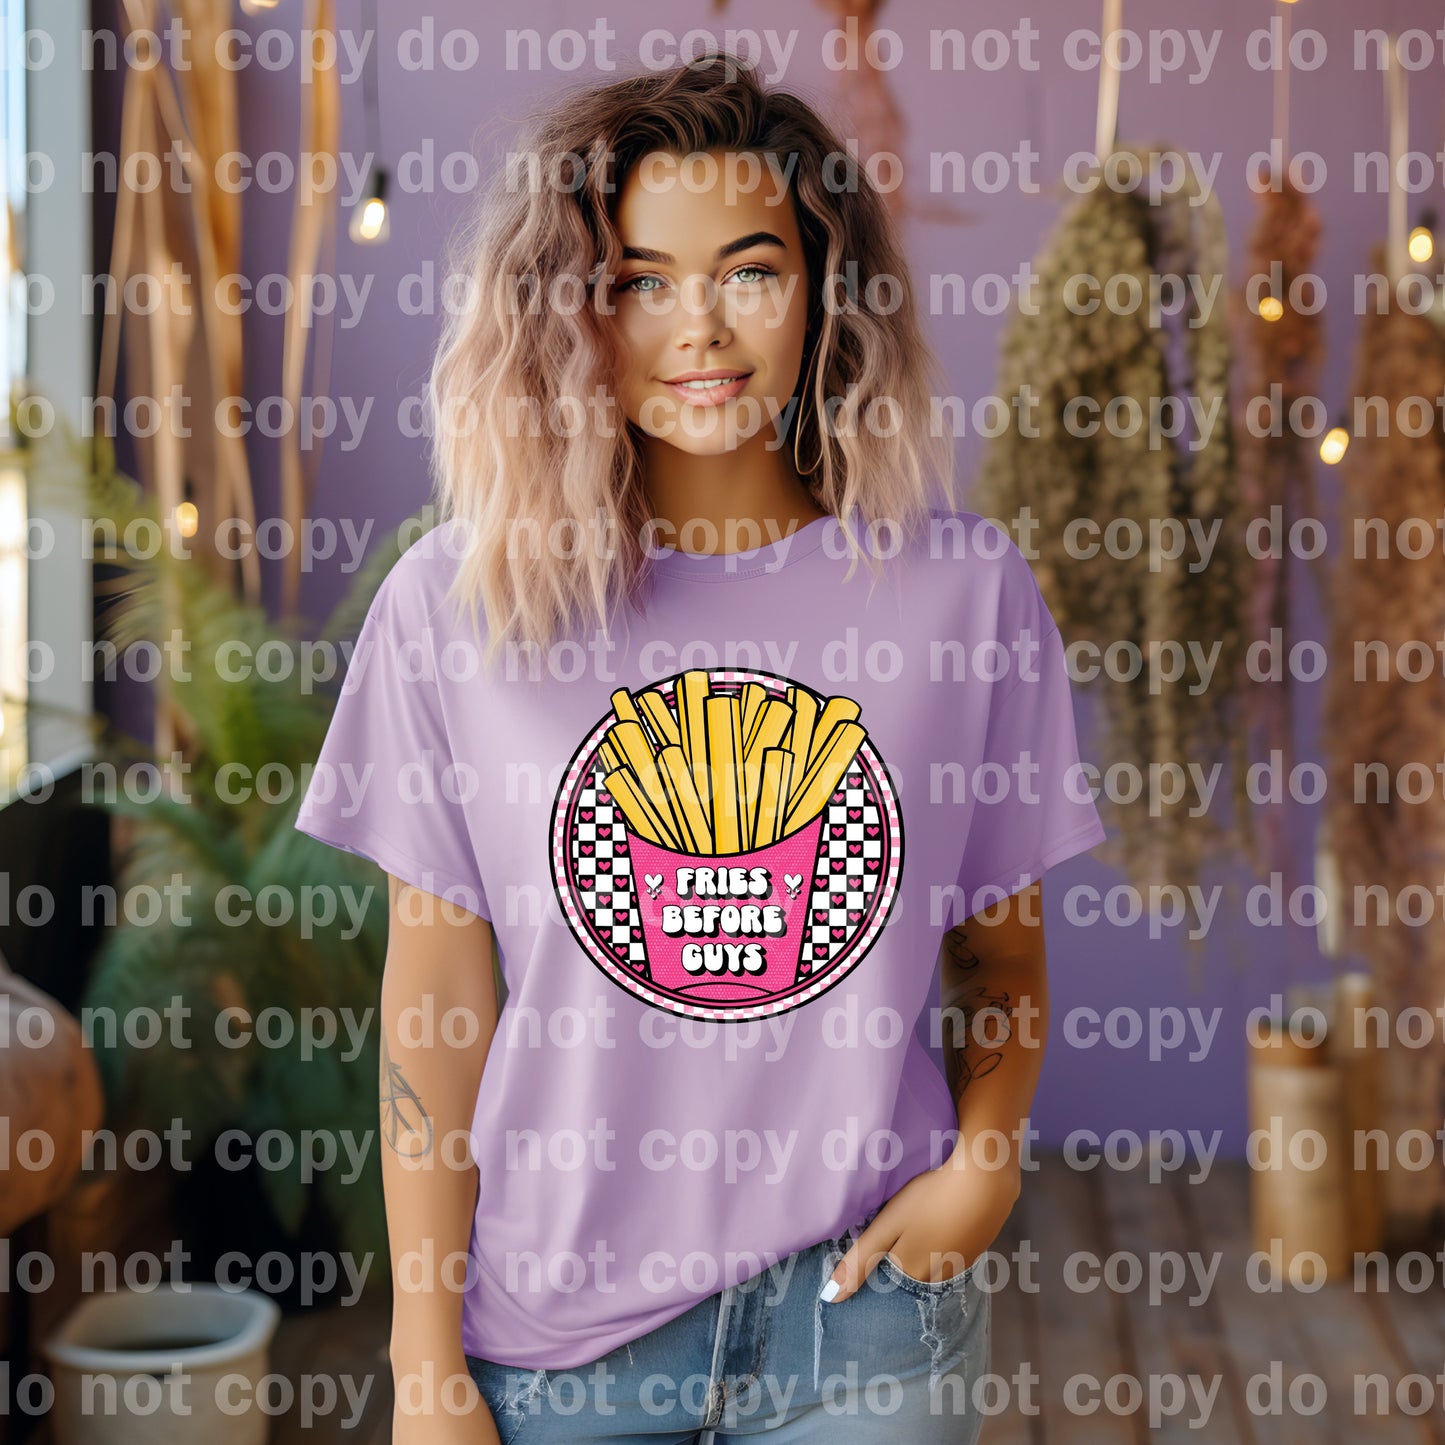 Fries Before Guys Round Dream Print or Sublimation Print